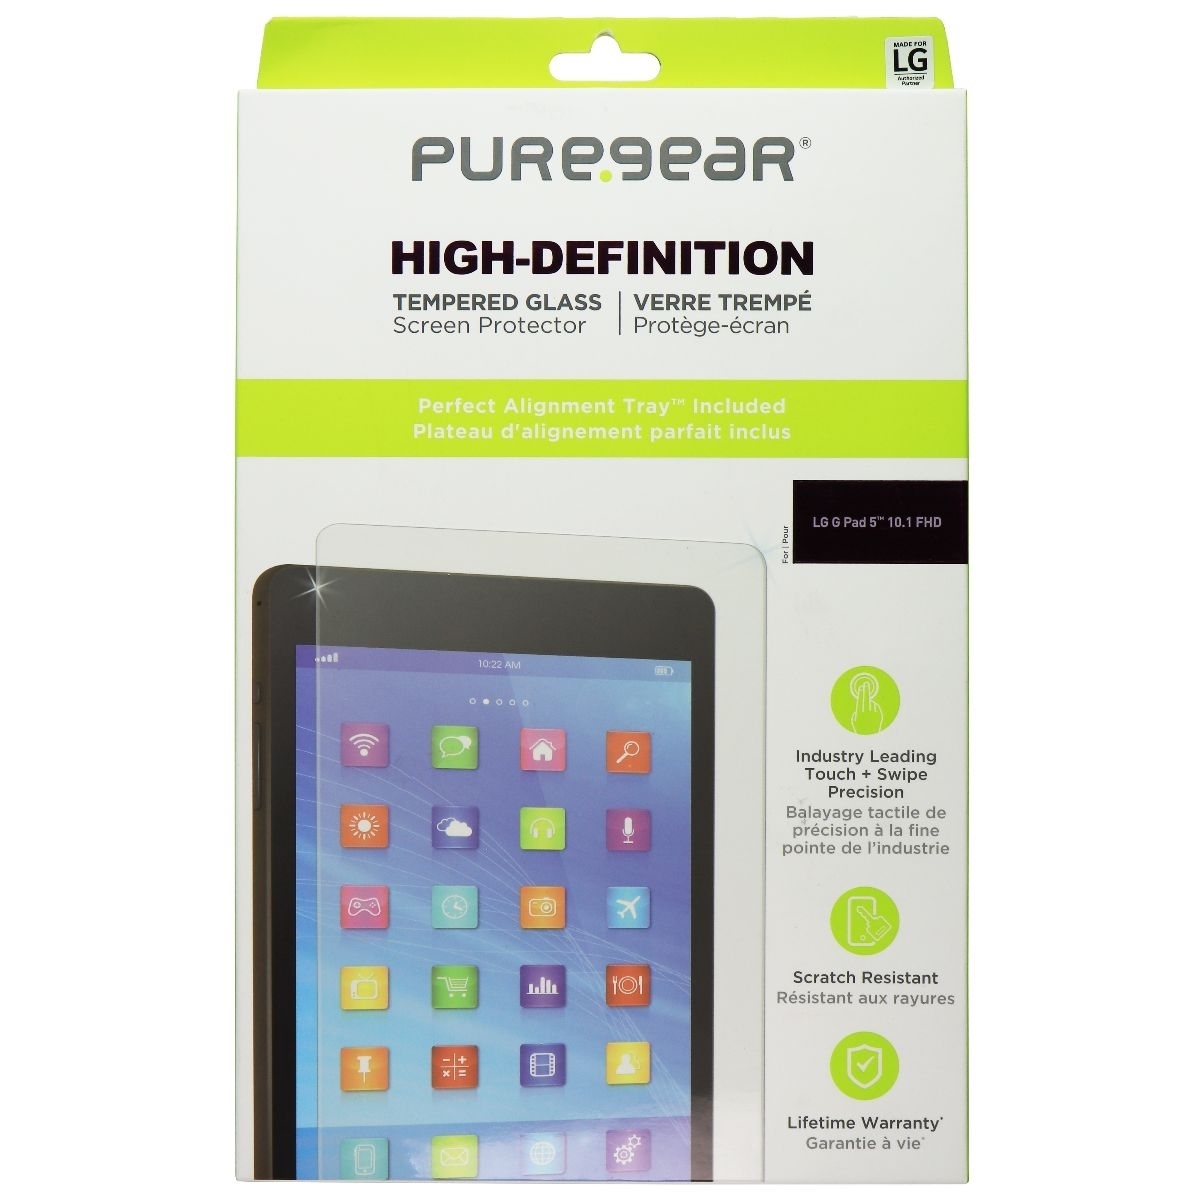 Pure Gear High Definition Tempered Glass For LG G Pad 5 (10.1-inch) FHD - Clear (Refurbished)